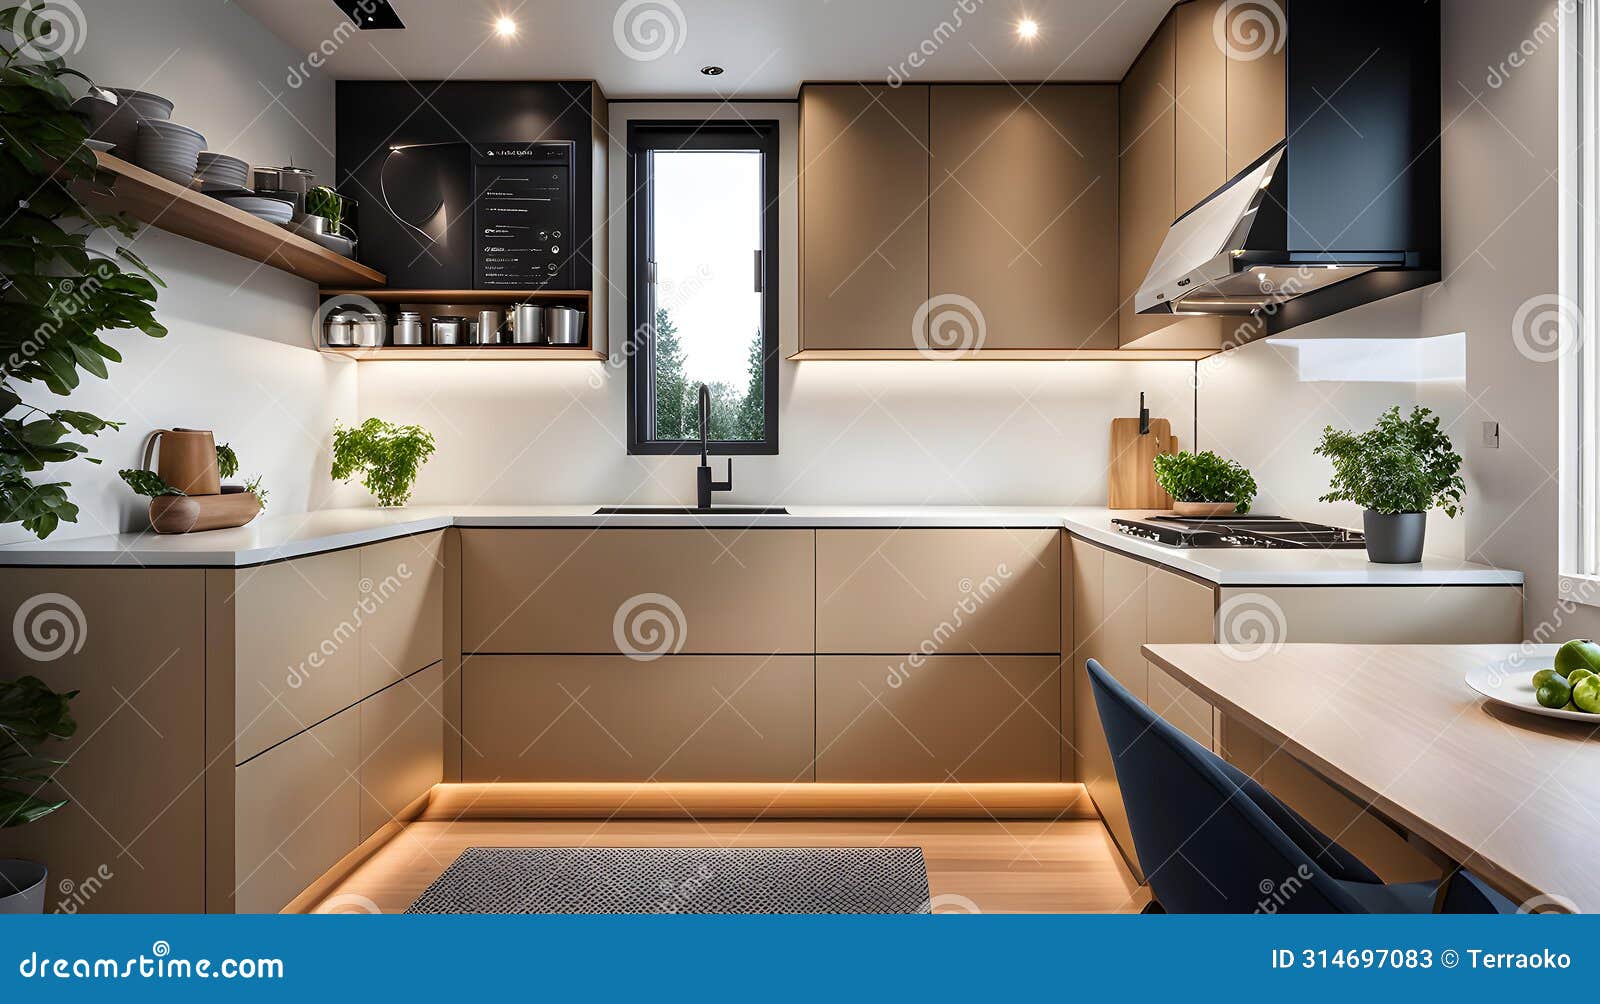 interior of a cozy and compact kitchen in a tiny house. the kitchen exudes modern elegance with clean lines, warm lighting